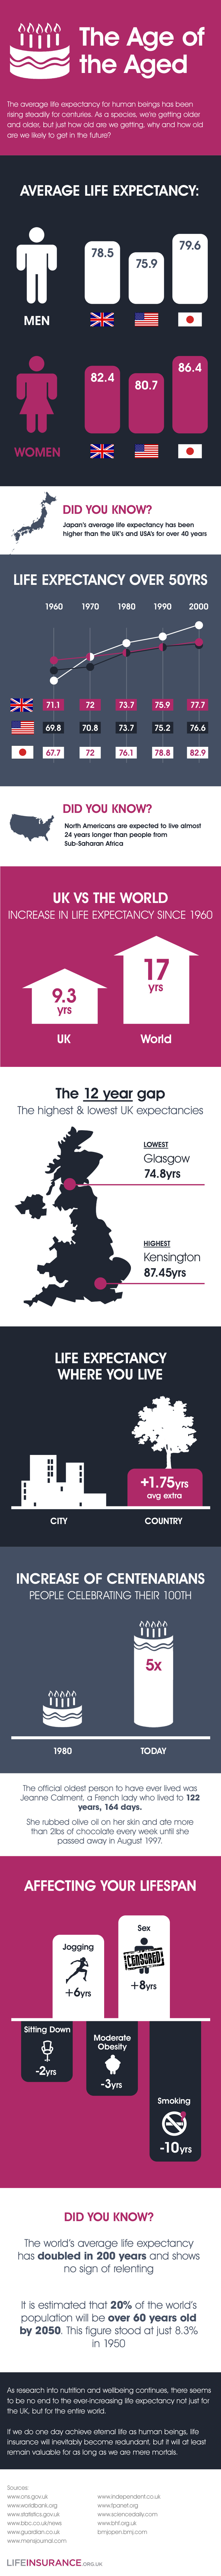 The Age of the Aged by LifeInsurance.org.uk 